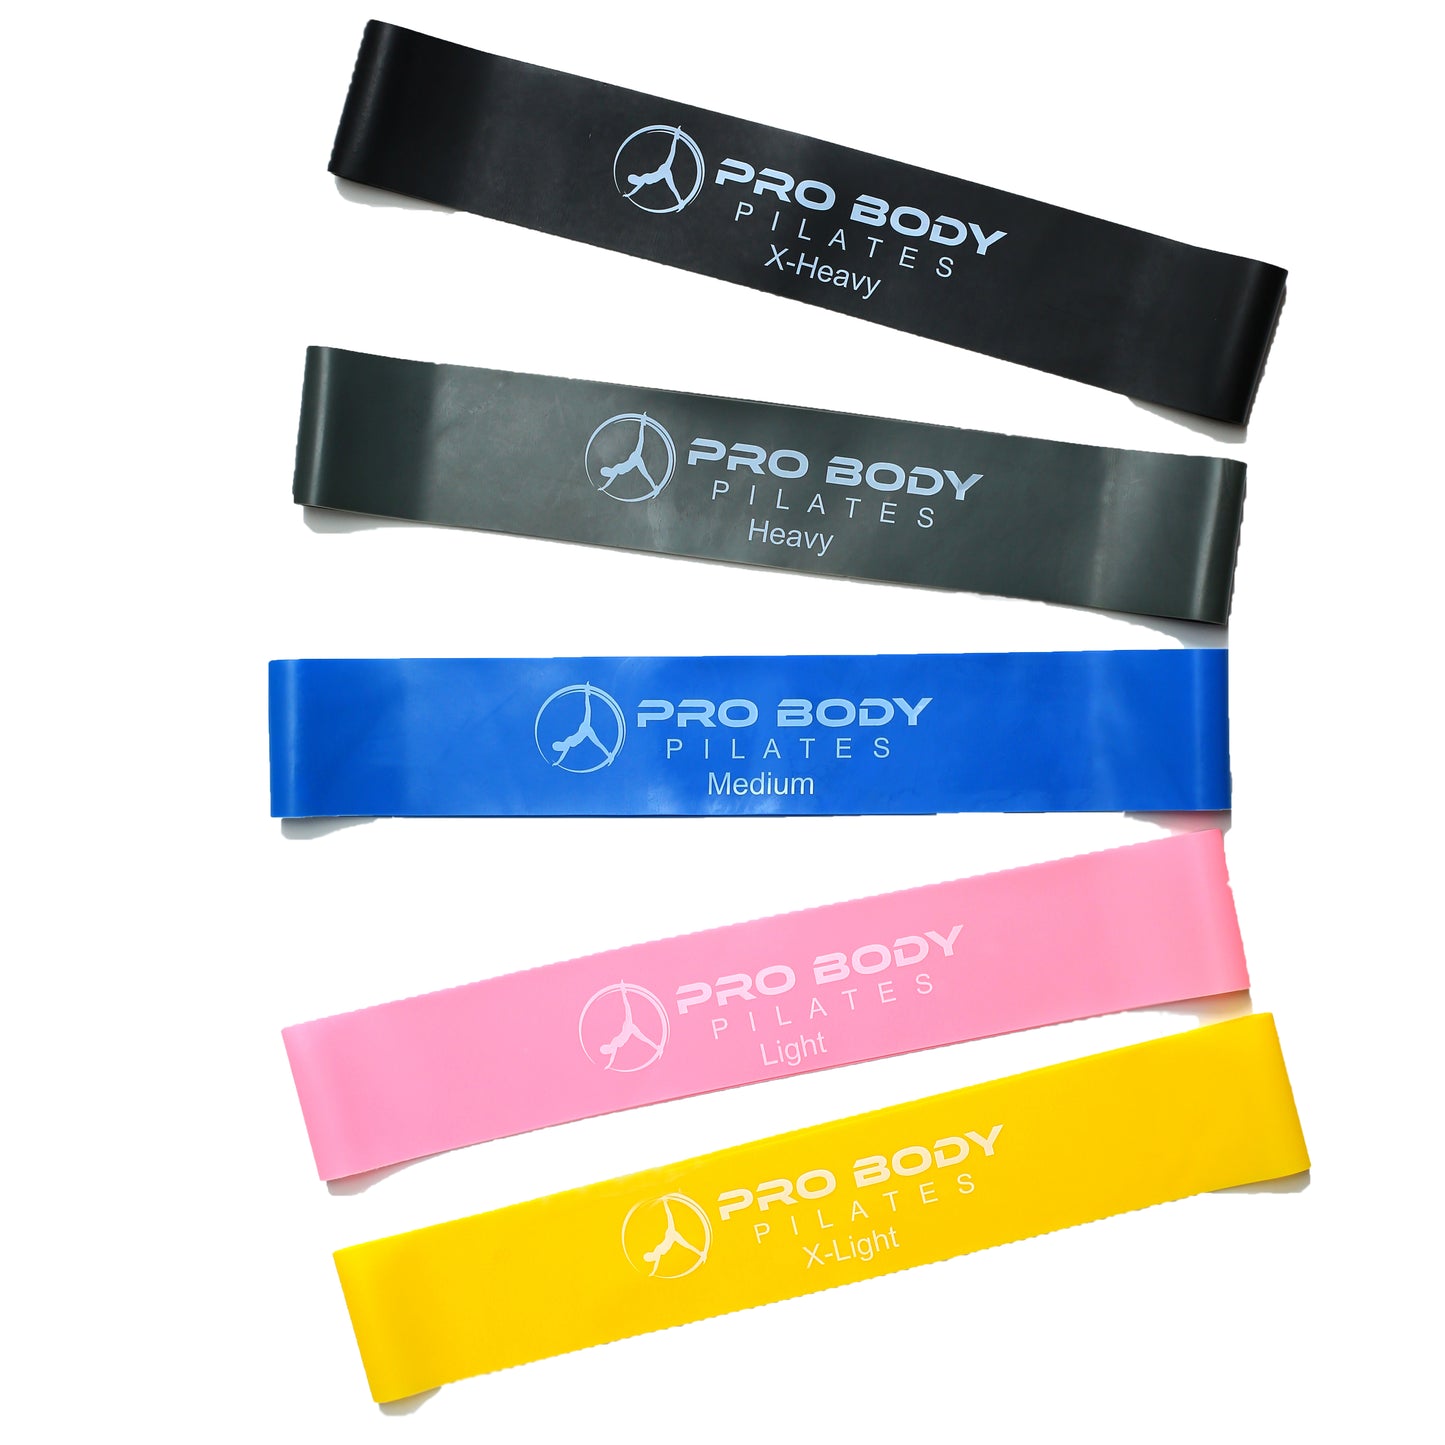 Premium Set of 5 Exercise Bands to Complement Pilates, Yoga, Physical Therapy and Strength Training